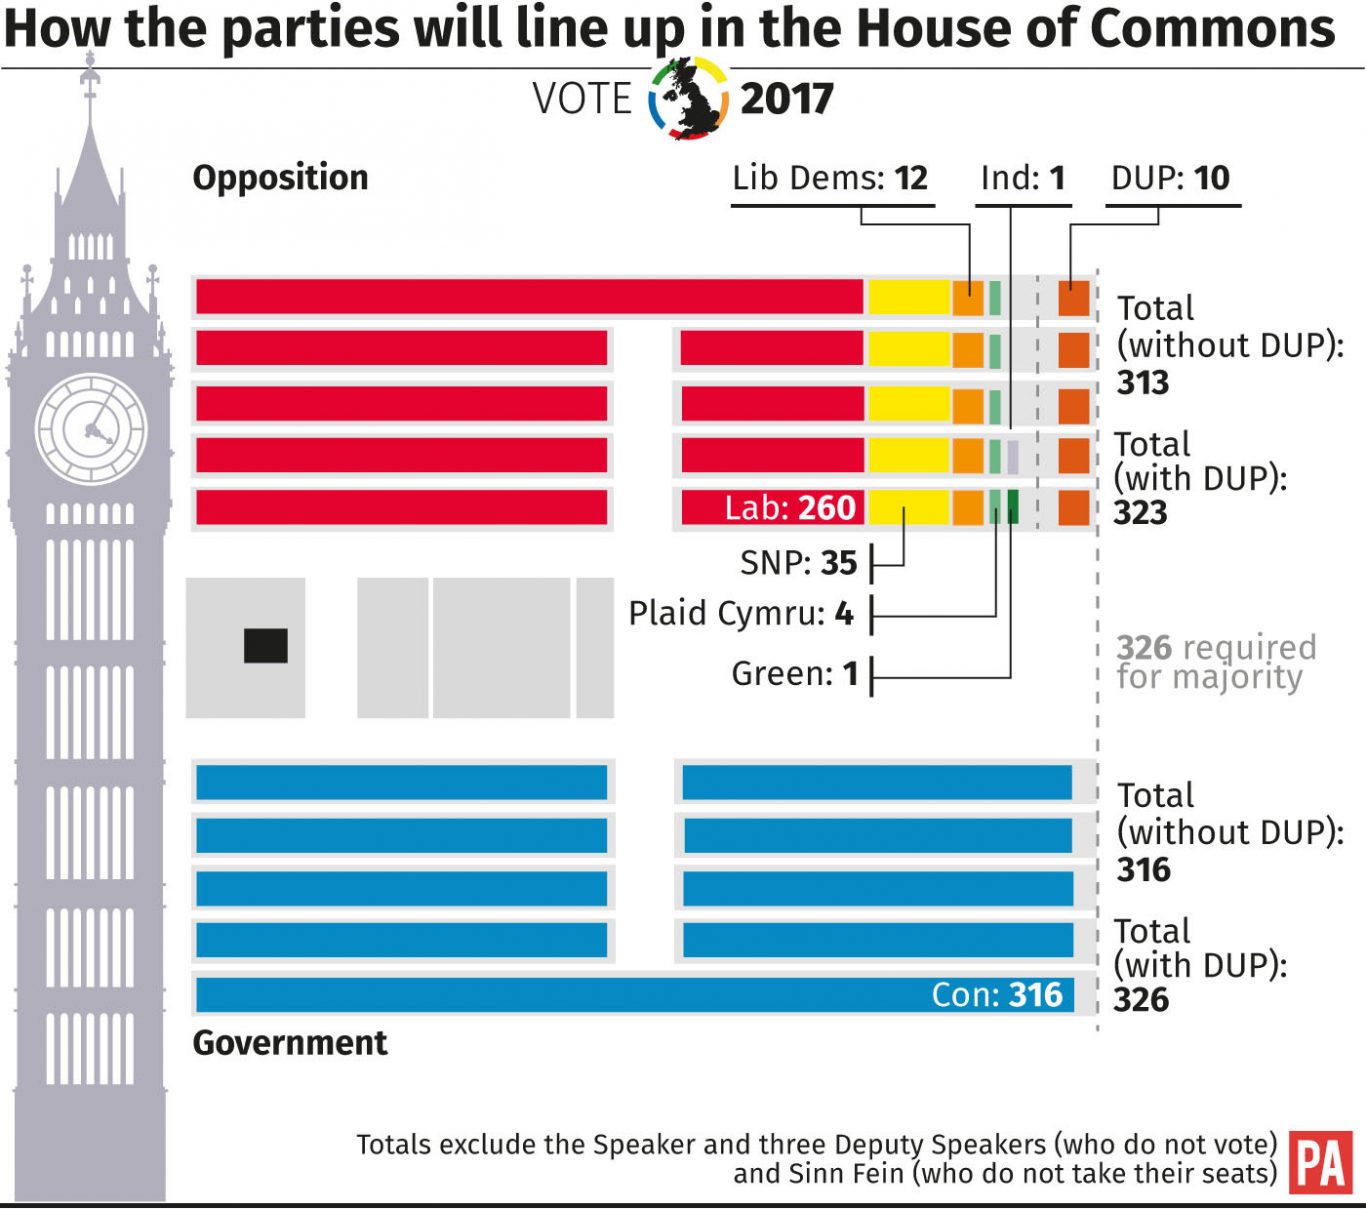 How the parties will line up in the House of Commons